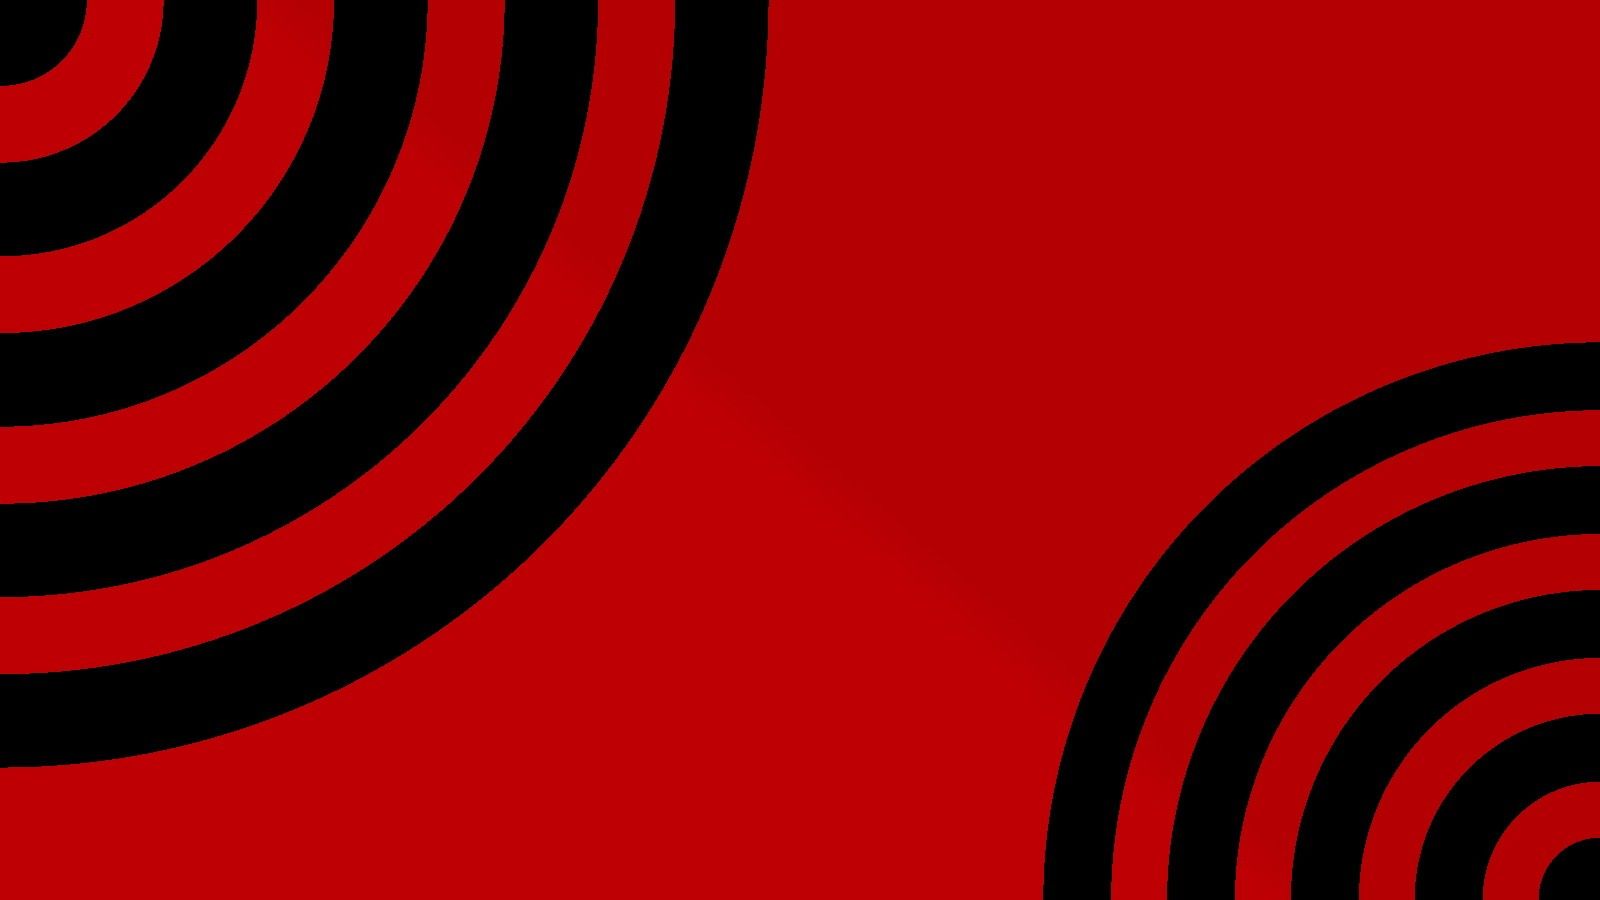 Black, Red, Waves, Circles, Psychedelic, Simple, Background